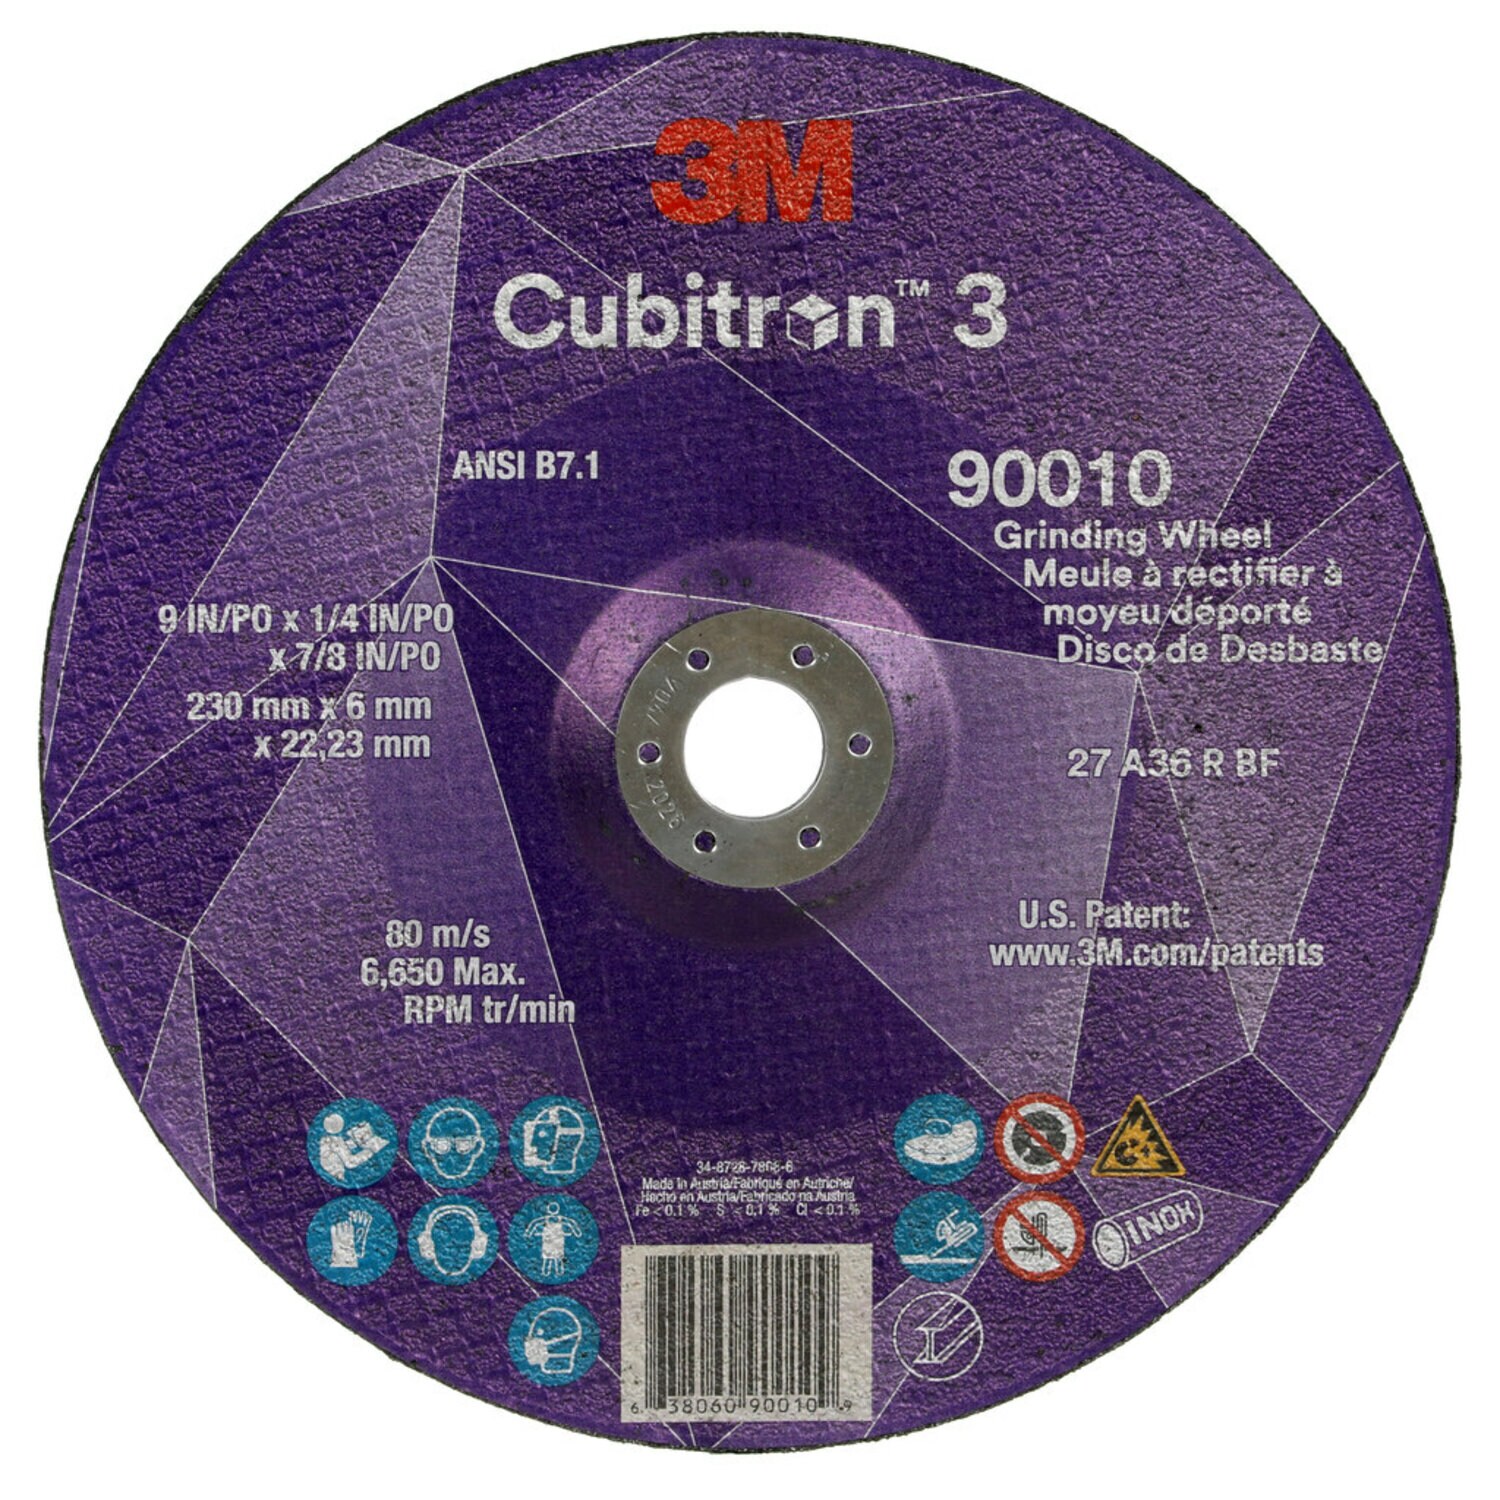 7100313202 - 3M Cubitron 3 Depressed Center Grinding Wheel, 90010, 36+, T27, 9 in x
1/4 in x 7/8 in (230x6x22.23mm) ANSI, 10/Pack, 20 ea/Case